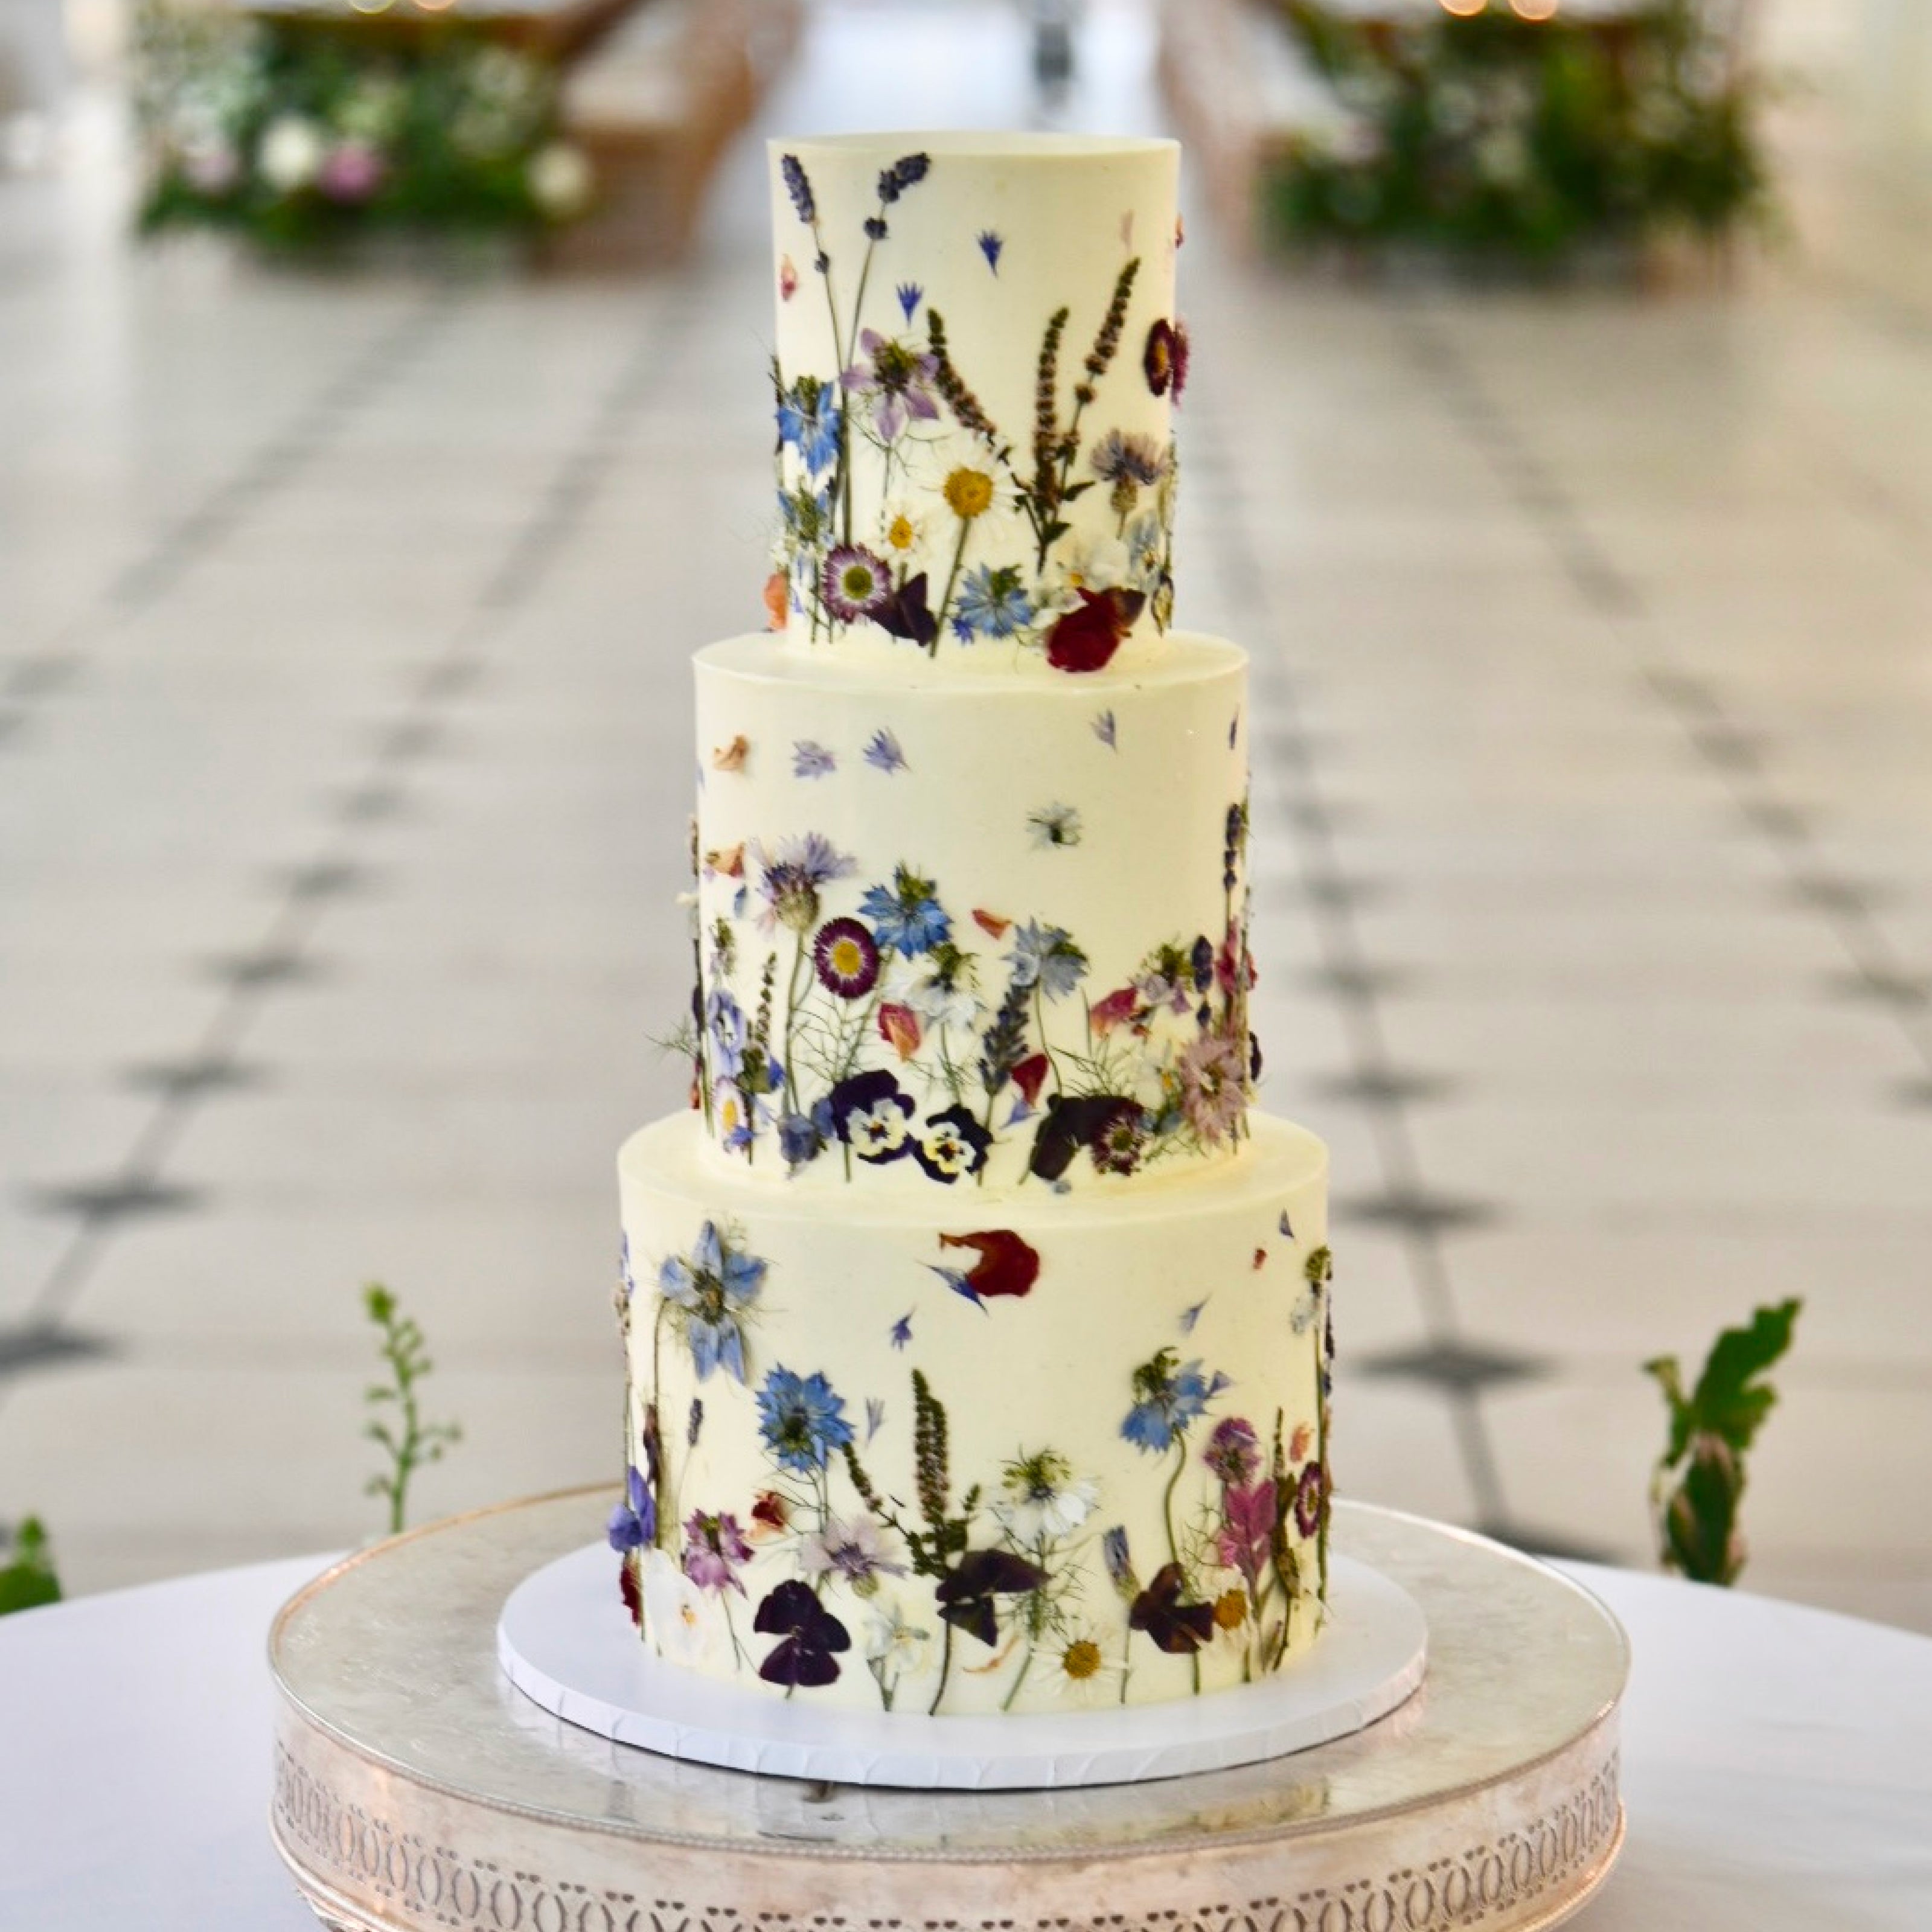 A three tier wedding cake decorated in blue flowers